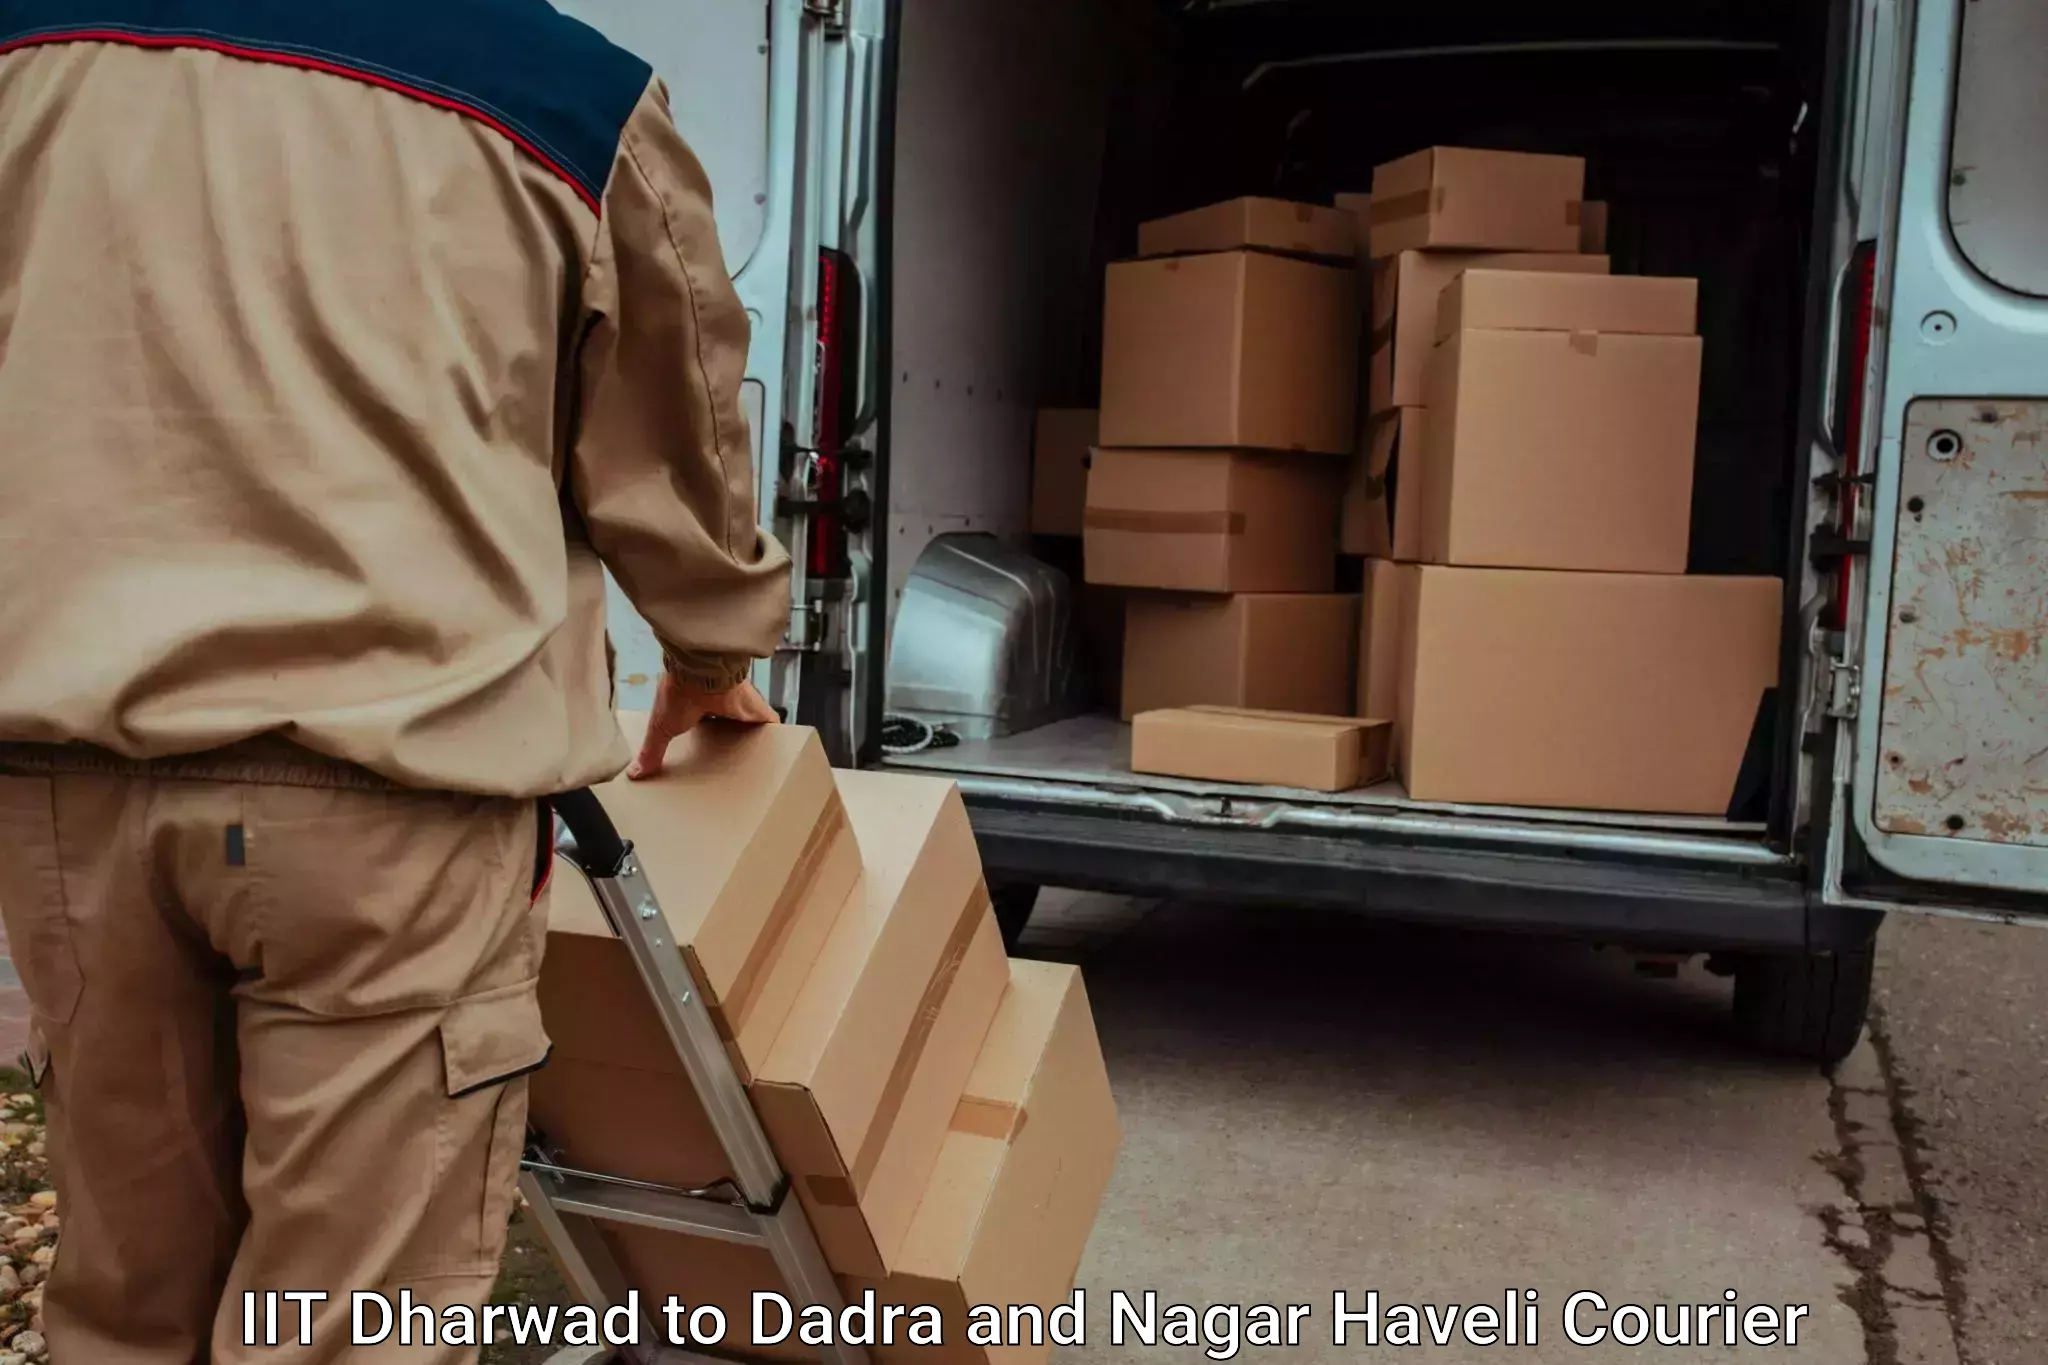 Quality relocation assistance IIT Dharwad to Dadra and Nagar Haveli